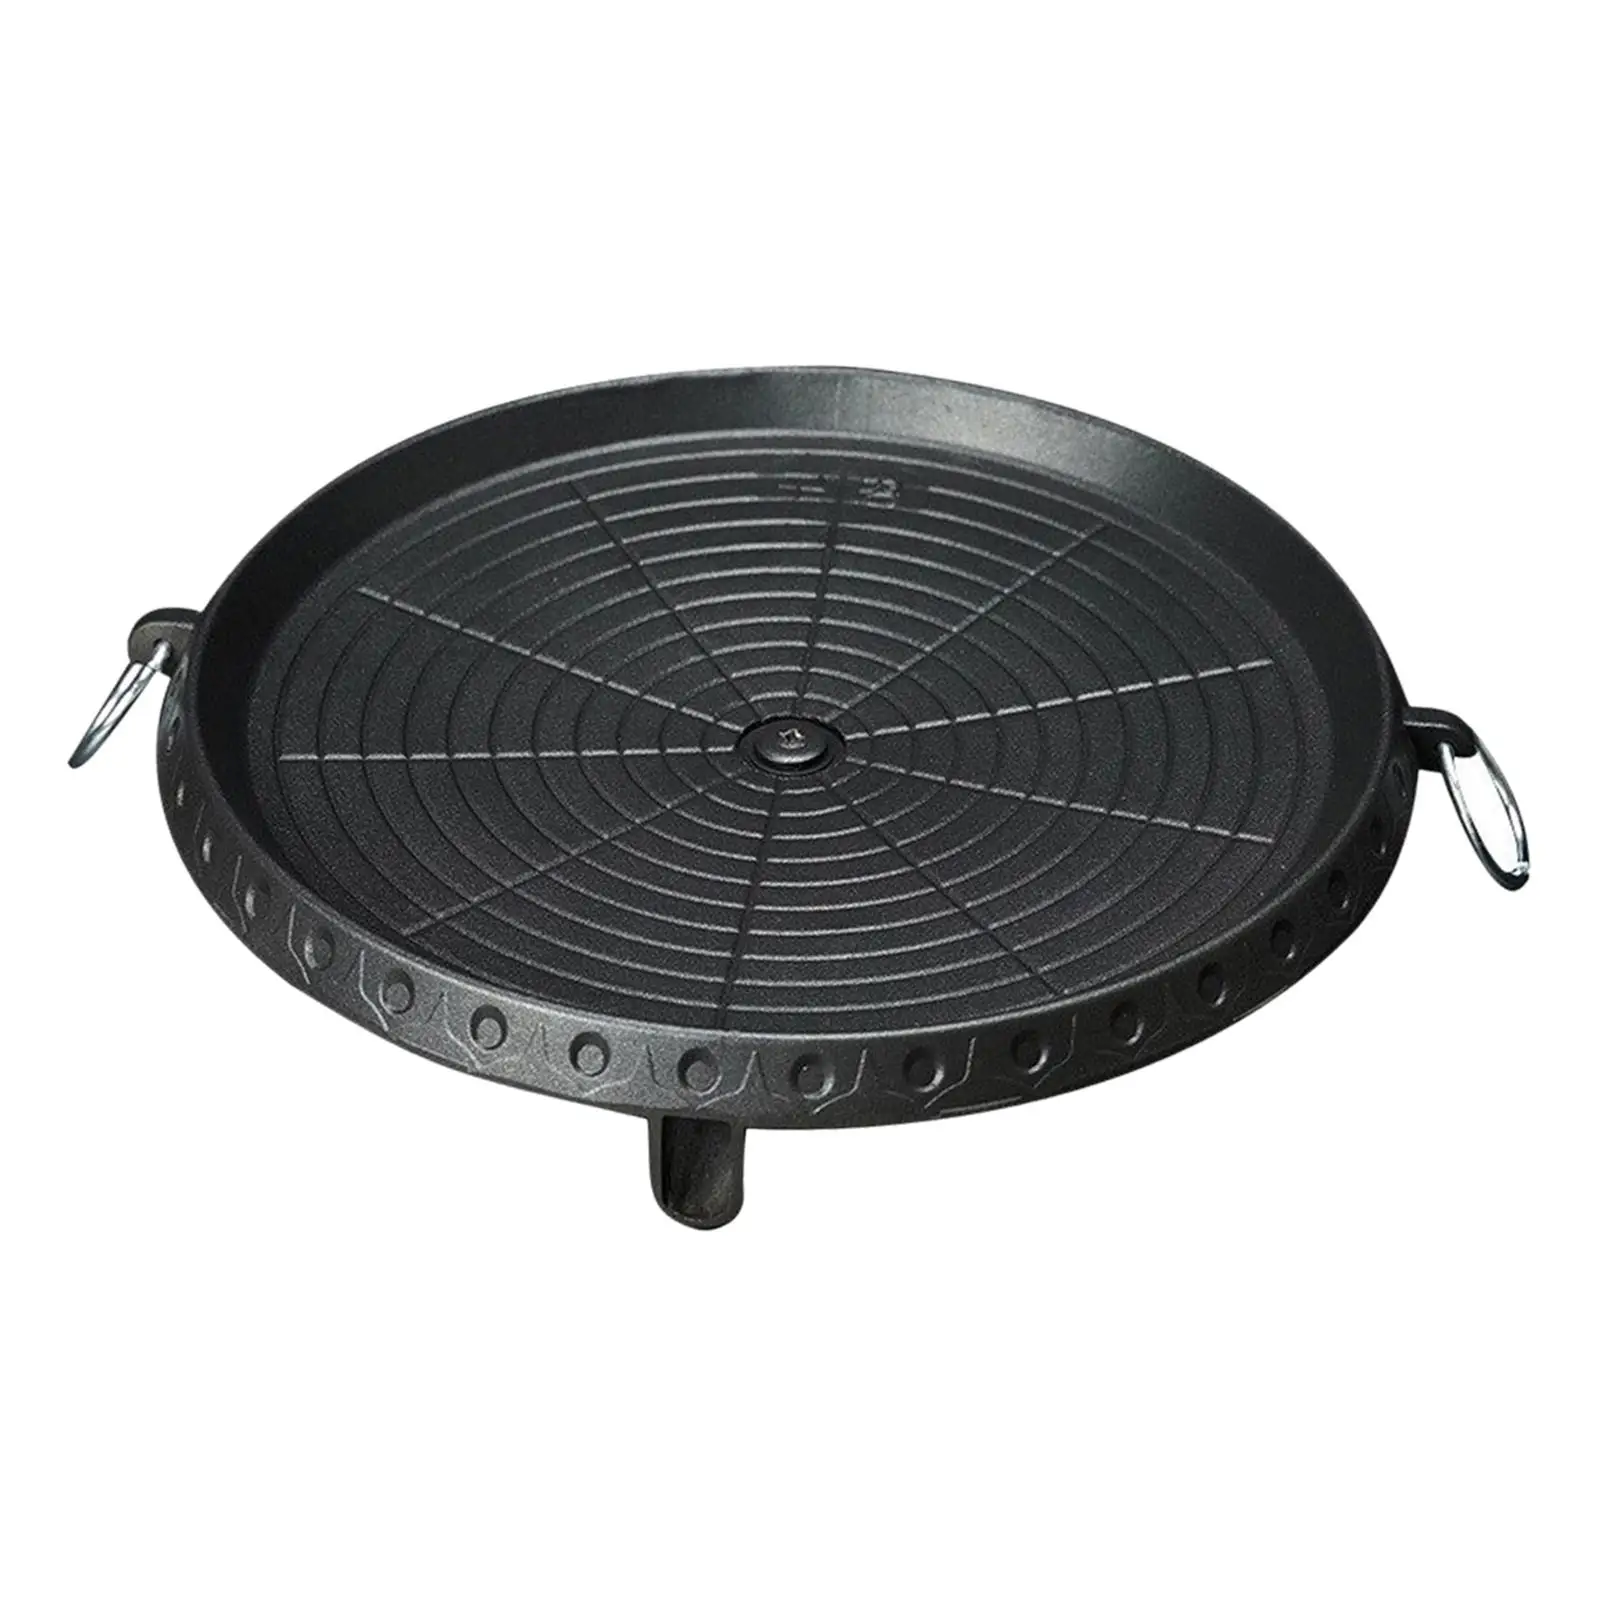 Frying Pan Griddle Skillet Induction Grill Pan Steak Kitchen Barbecue